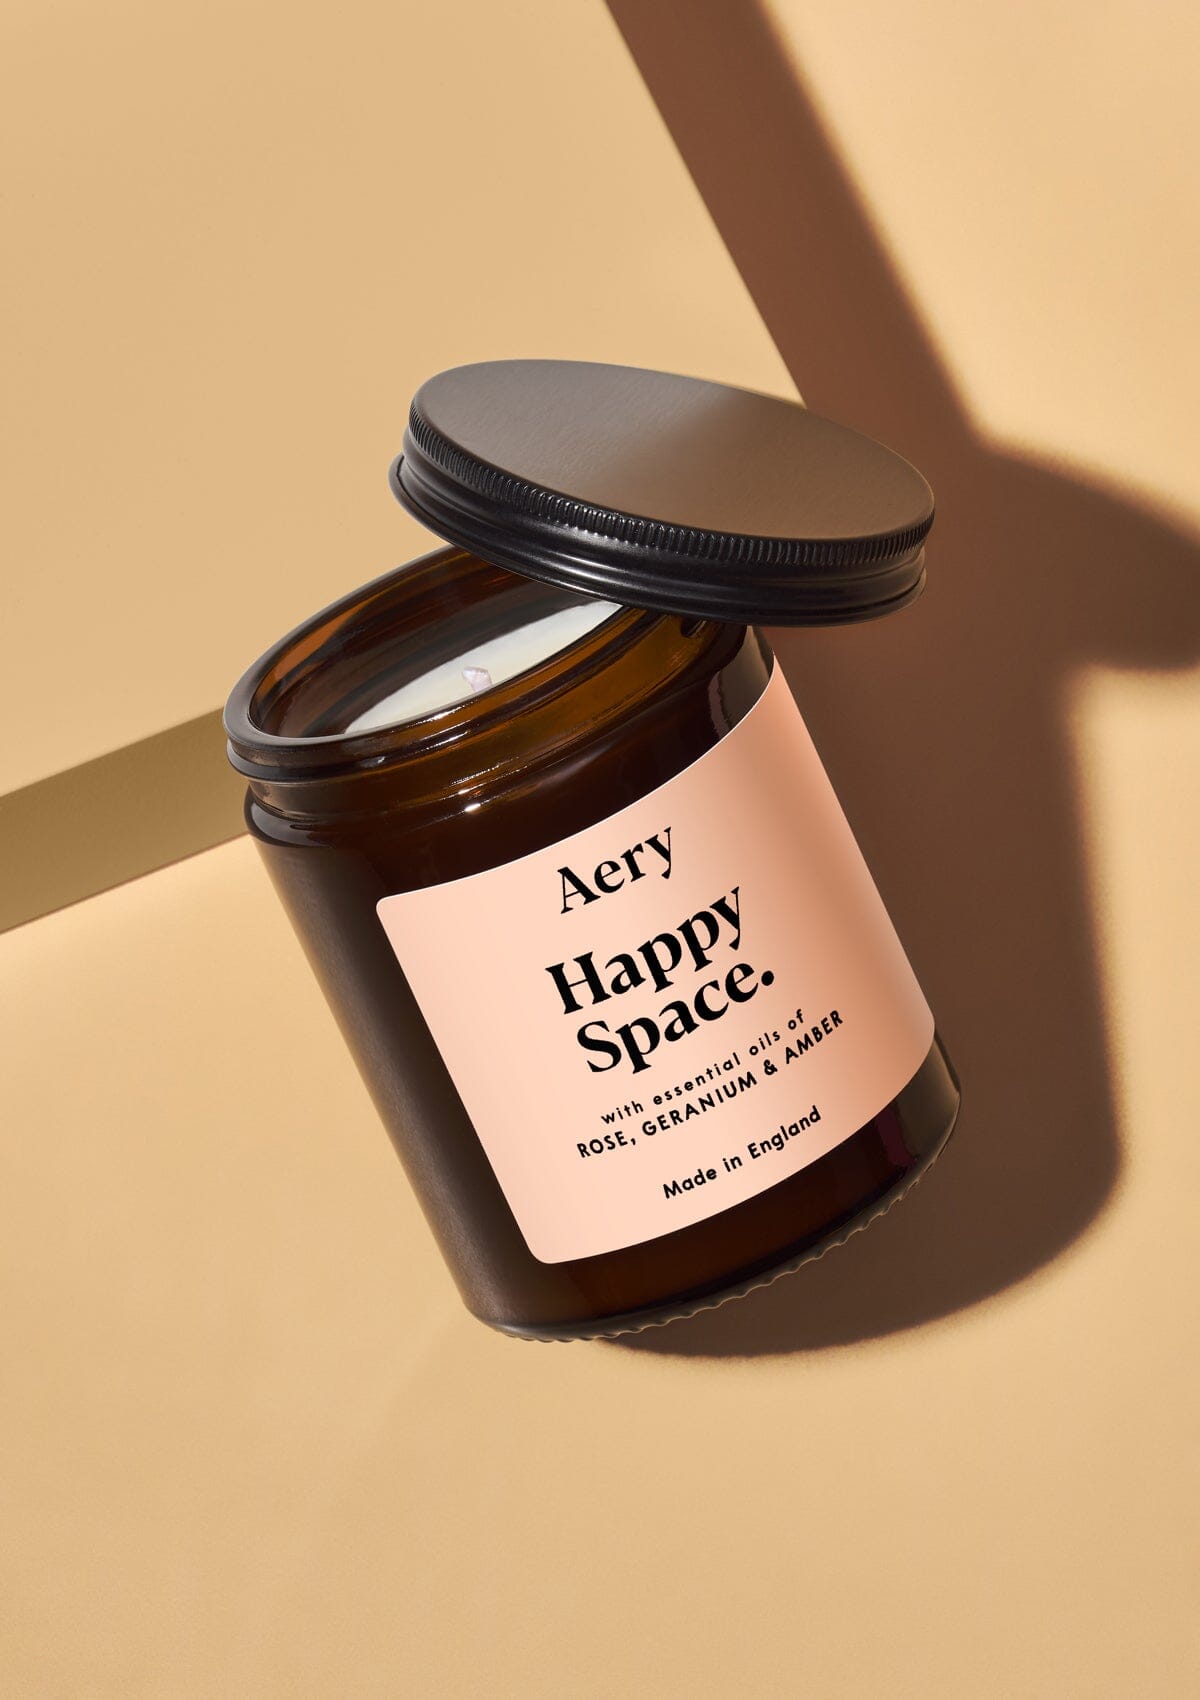 Happy Space Scented Jar Candle - Rose Geranium and Amber